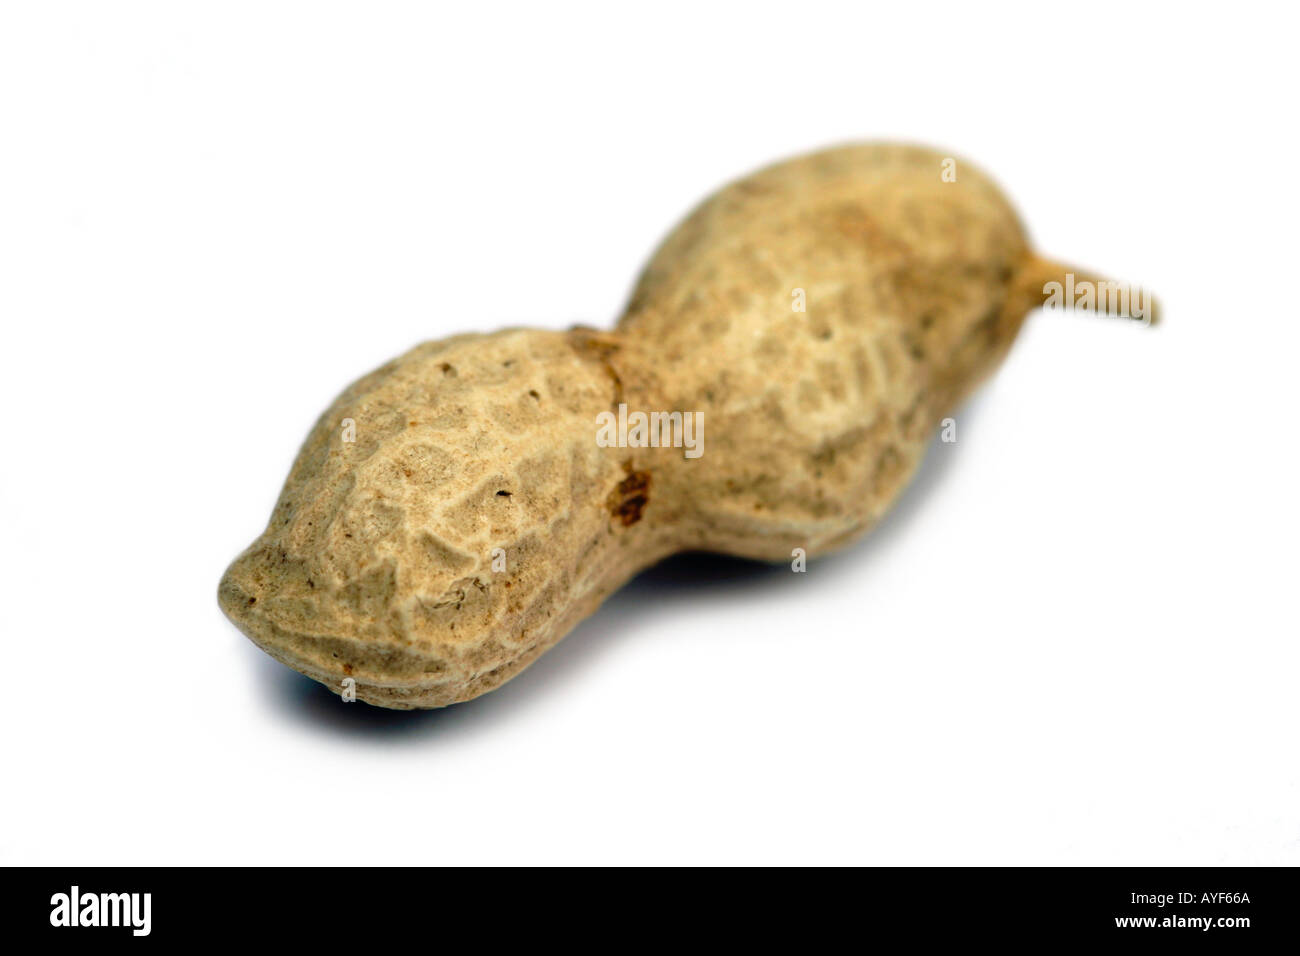 Peanut is shell low pay concepts Stock Photo